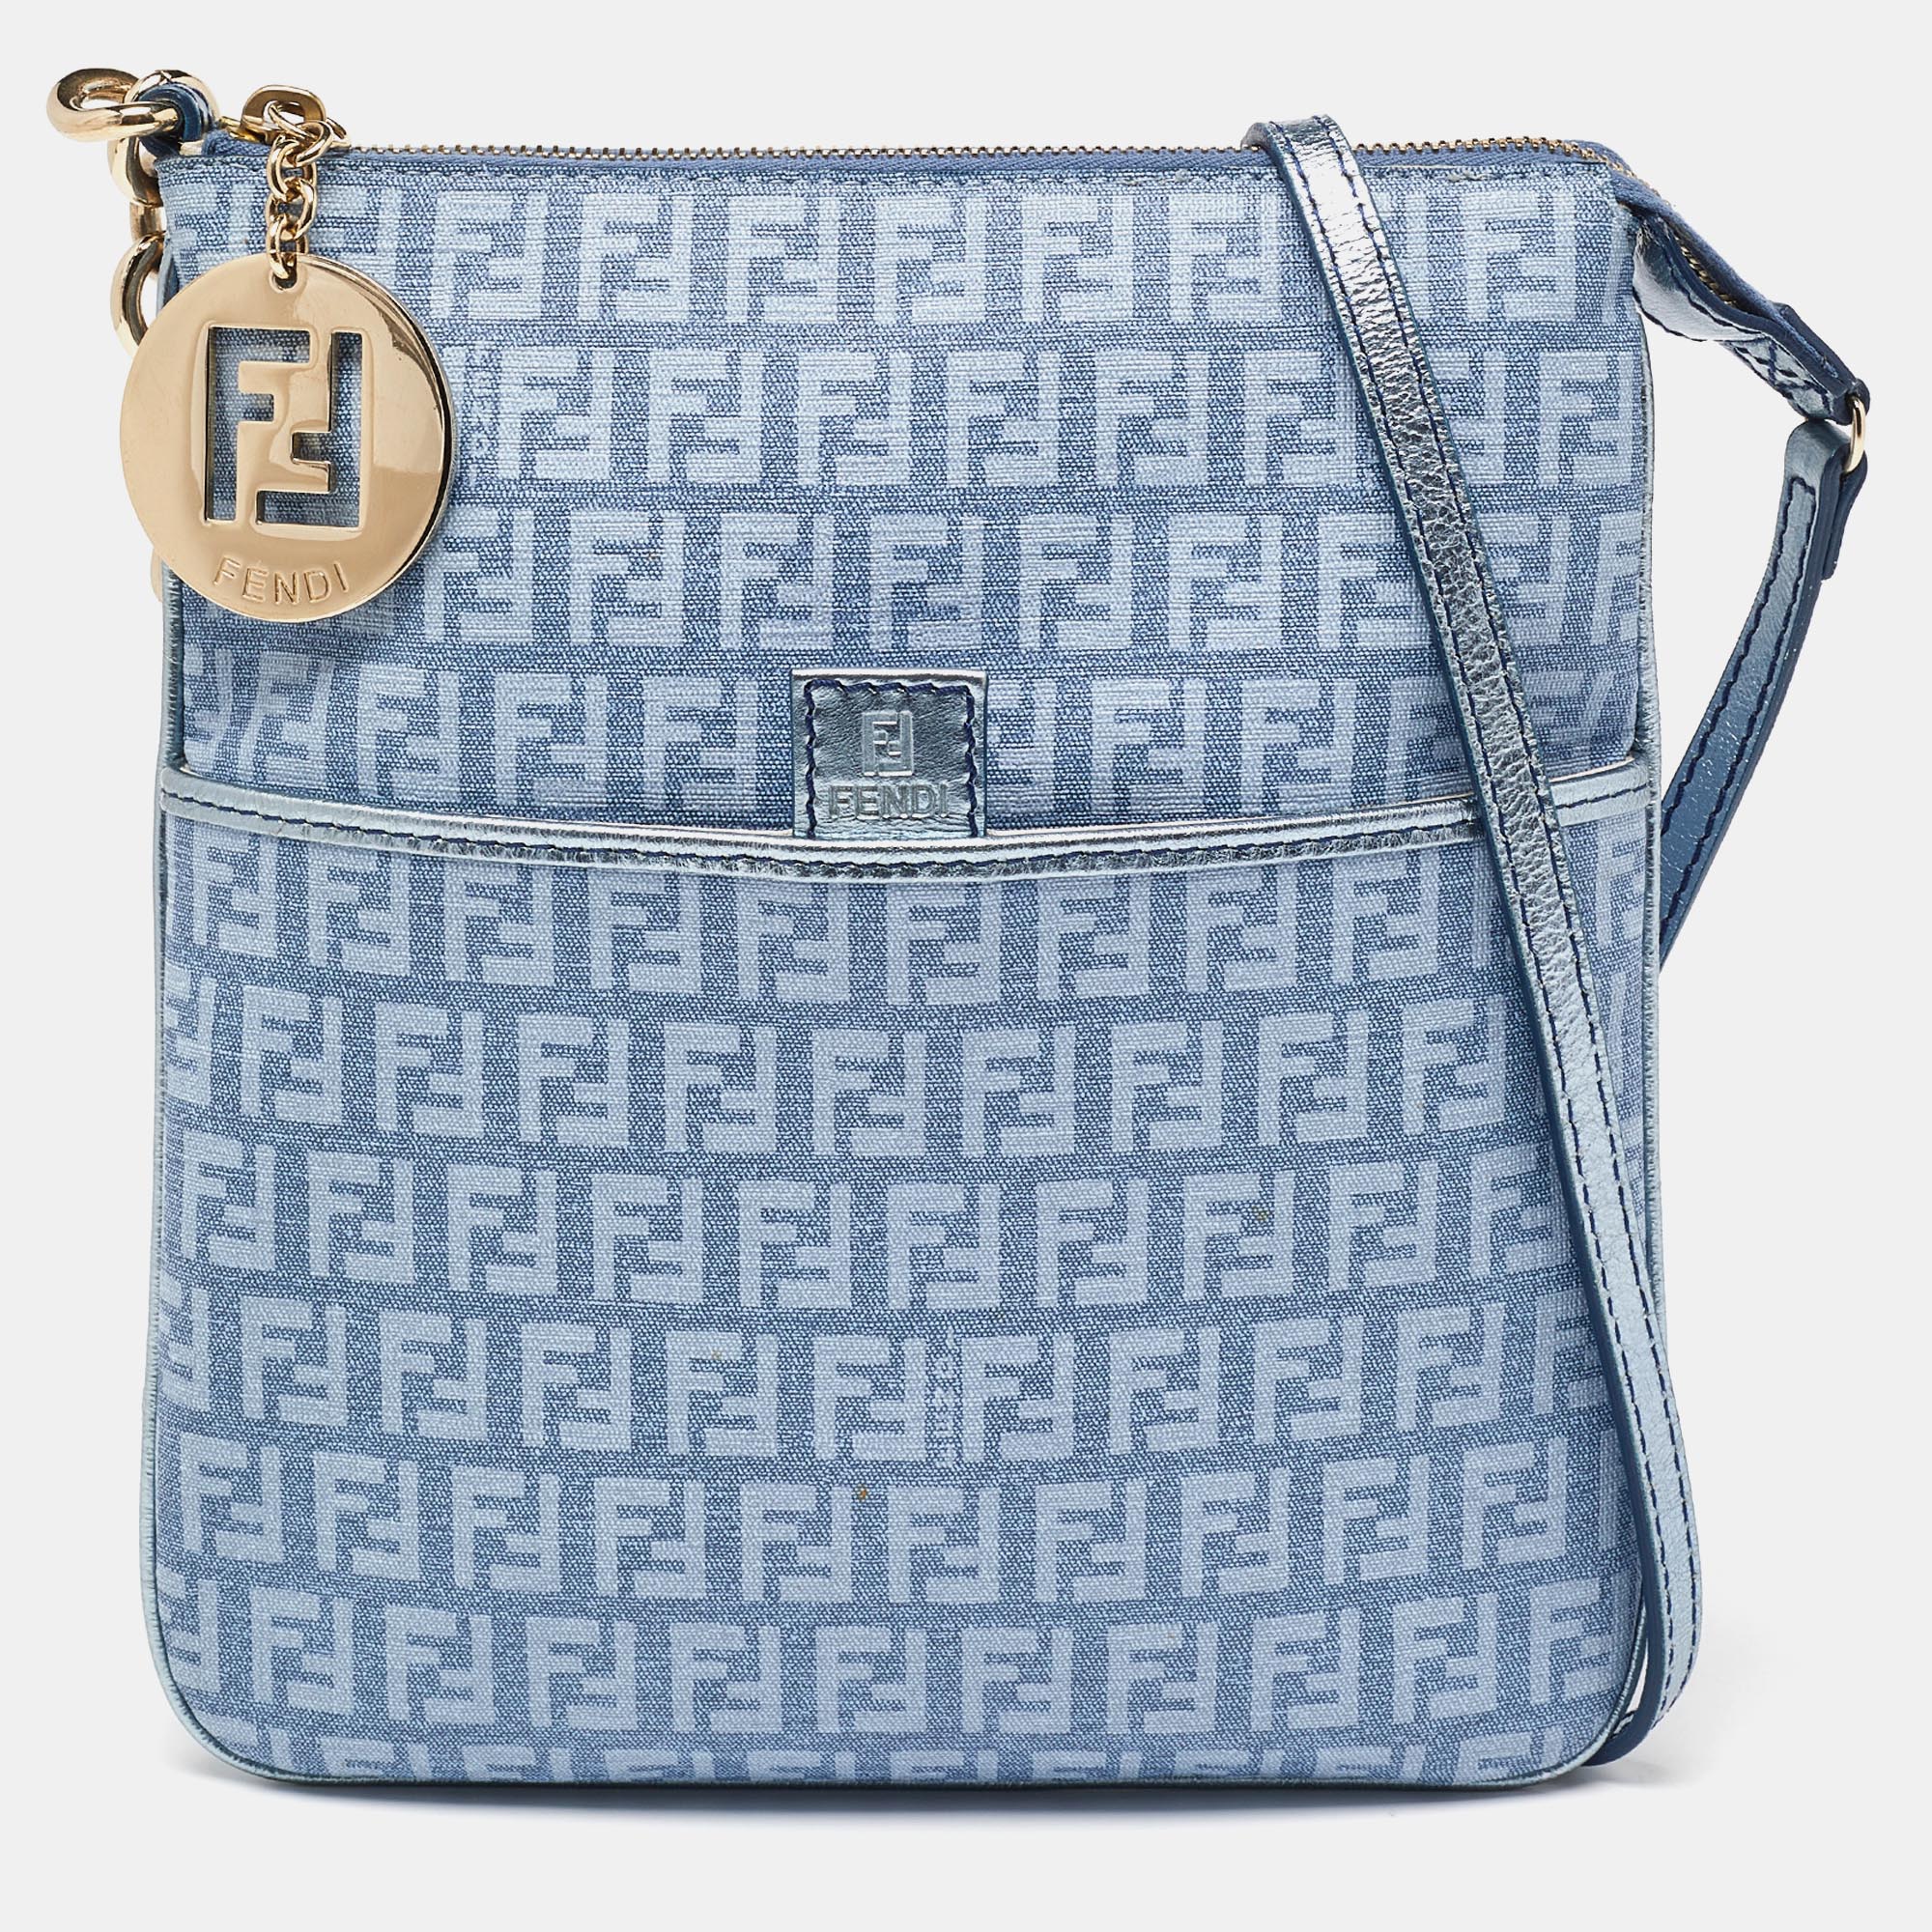 Express your personal style with this high end crossbody bag. Crafted from quality materials it has been added with fine details and is finished perfectly. It features a well sized interior.